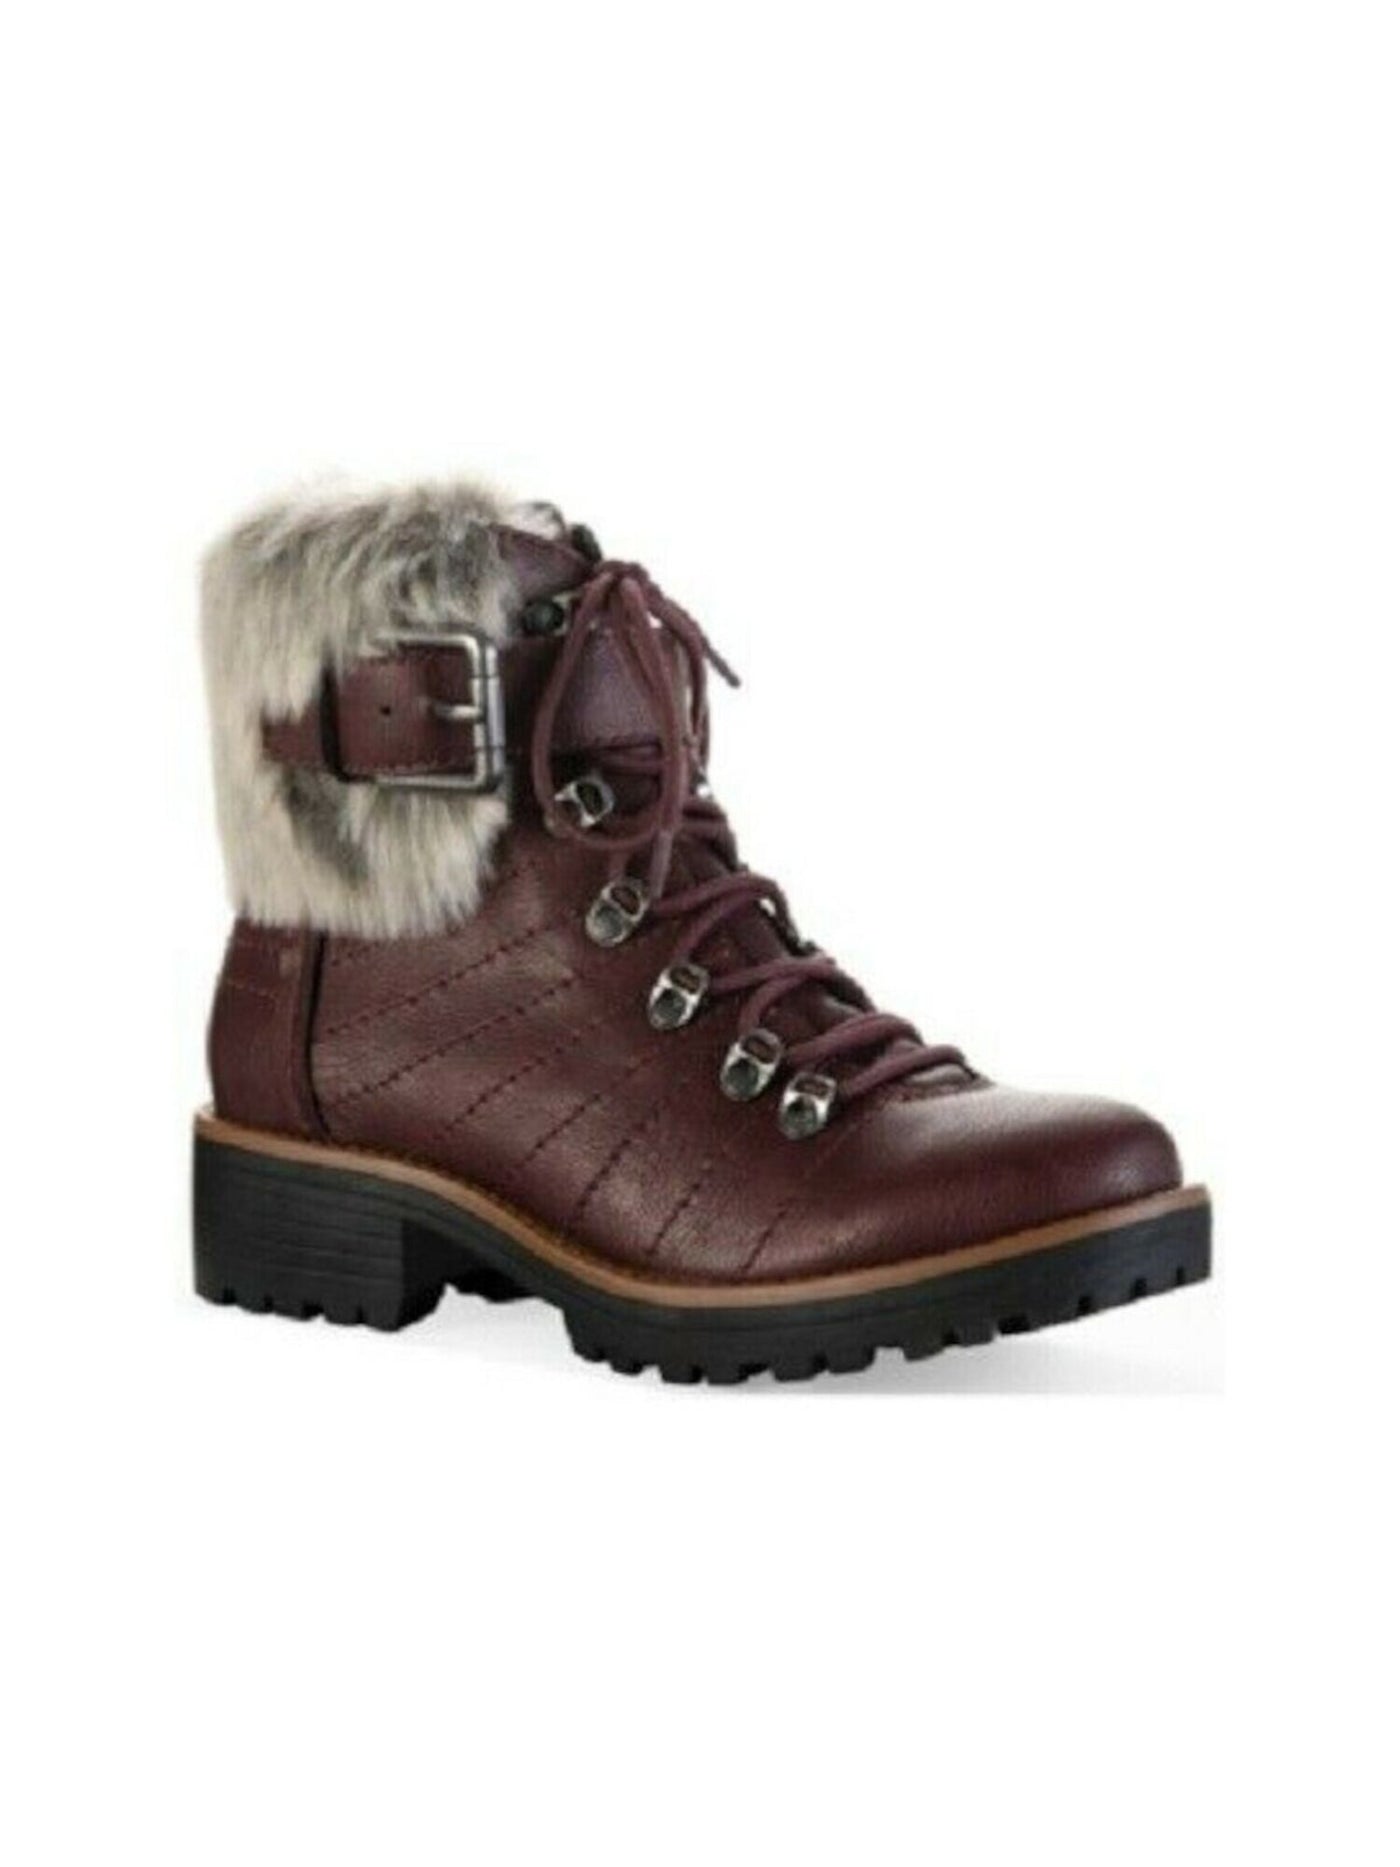 SUN STONE Womens Maroon Ankle Strap Buckle Detail Remova Cushioned Jojo Round Toe Block Heel Lace-Up Snow Boots 7